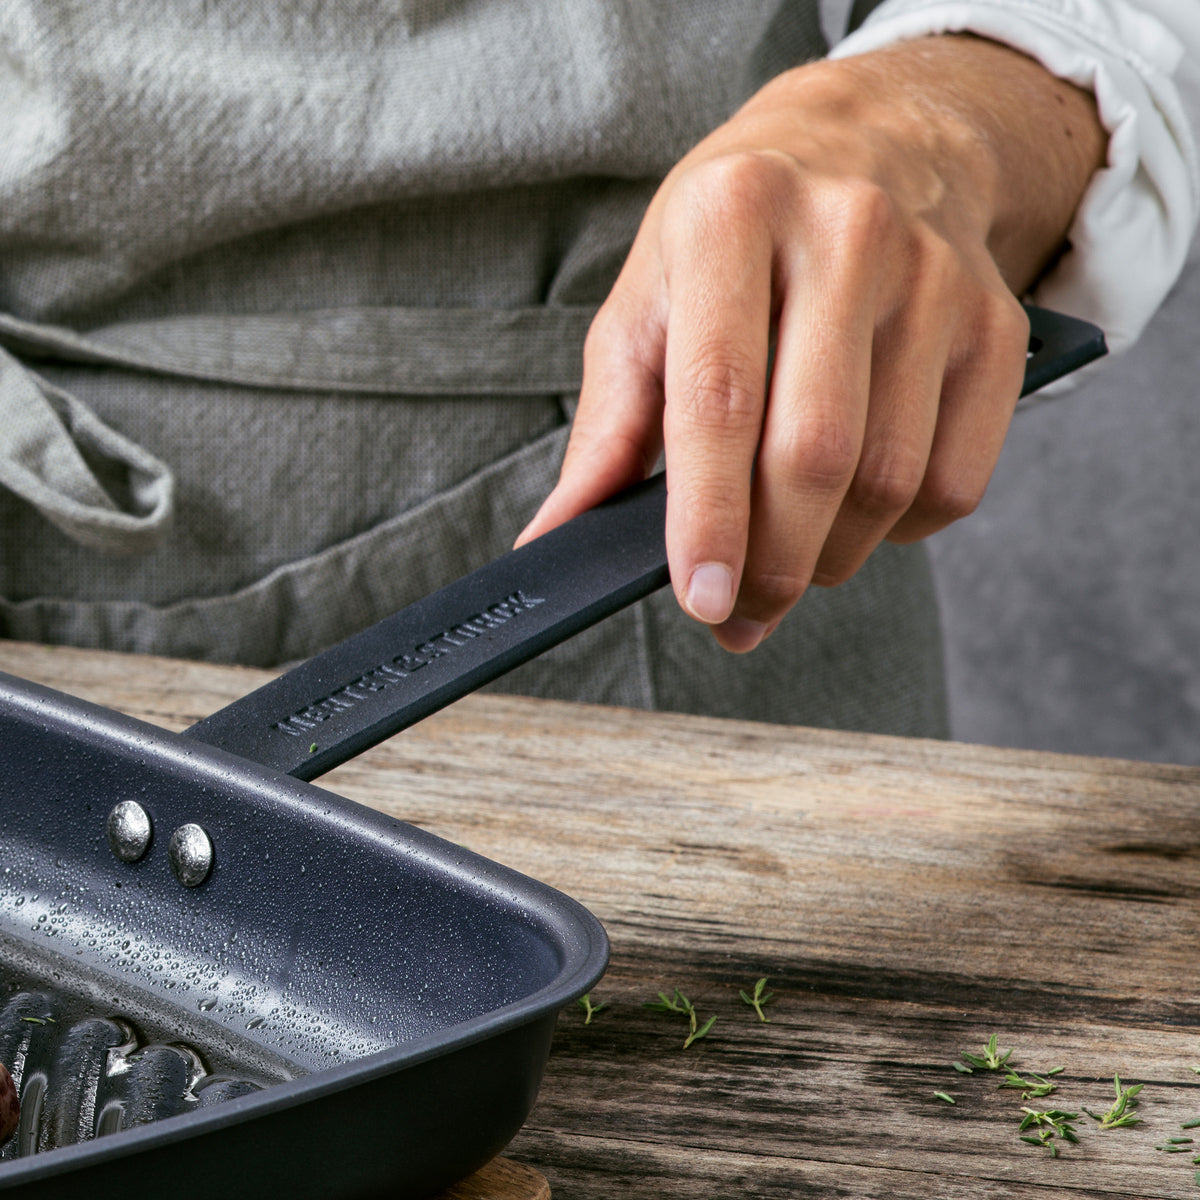 Professional-Quality Cookware, Non Stick, Carbon Steel, and Knives